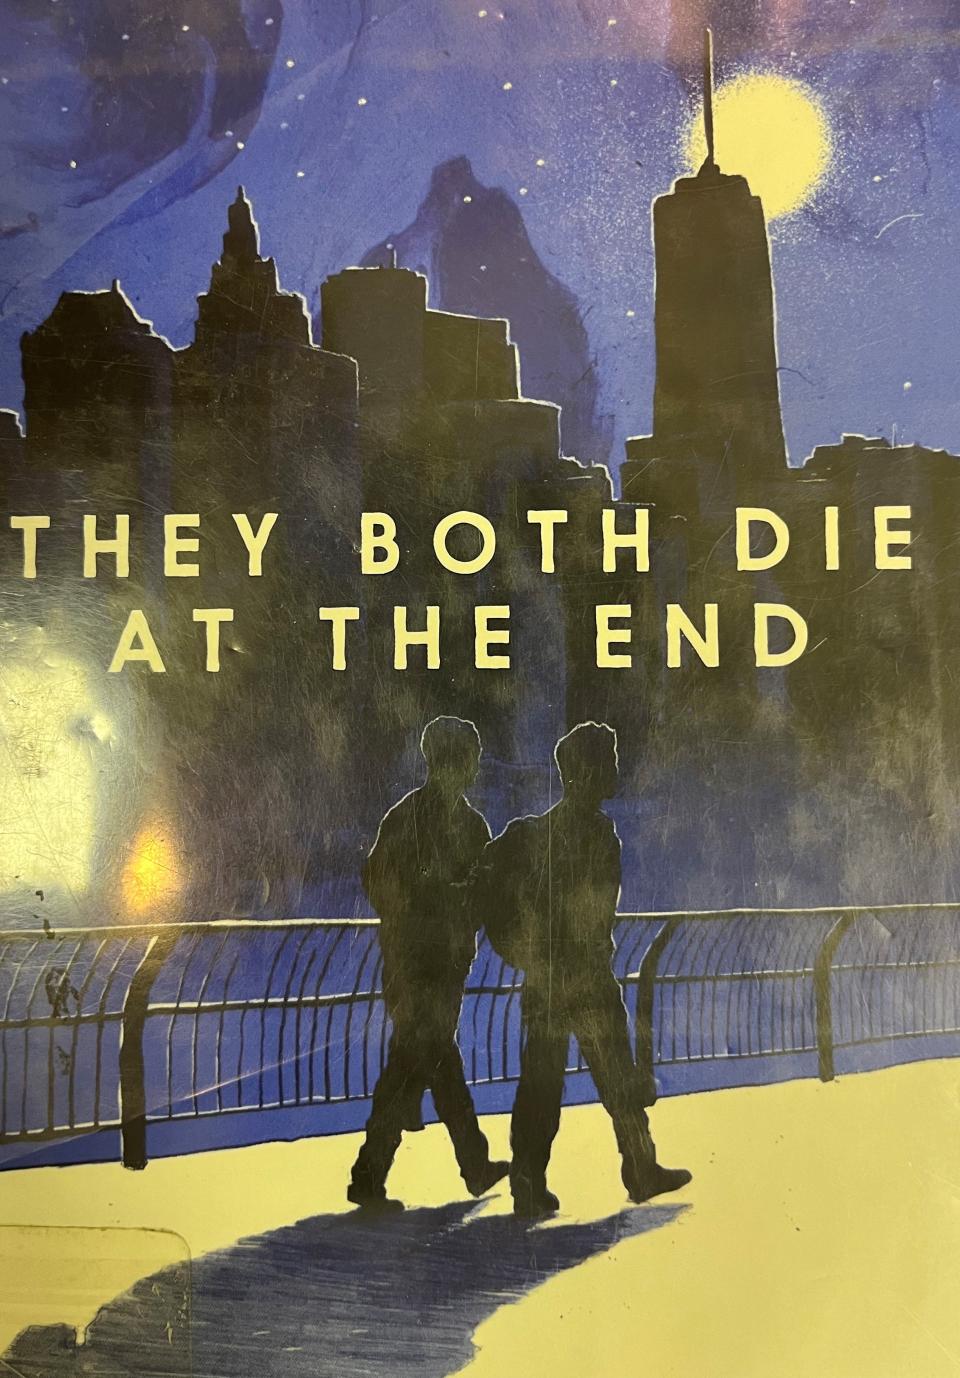 Book cover for "They Both Die at the End."